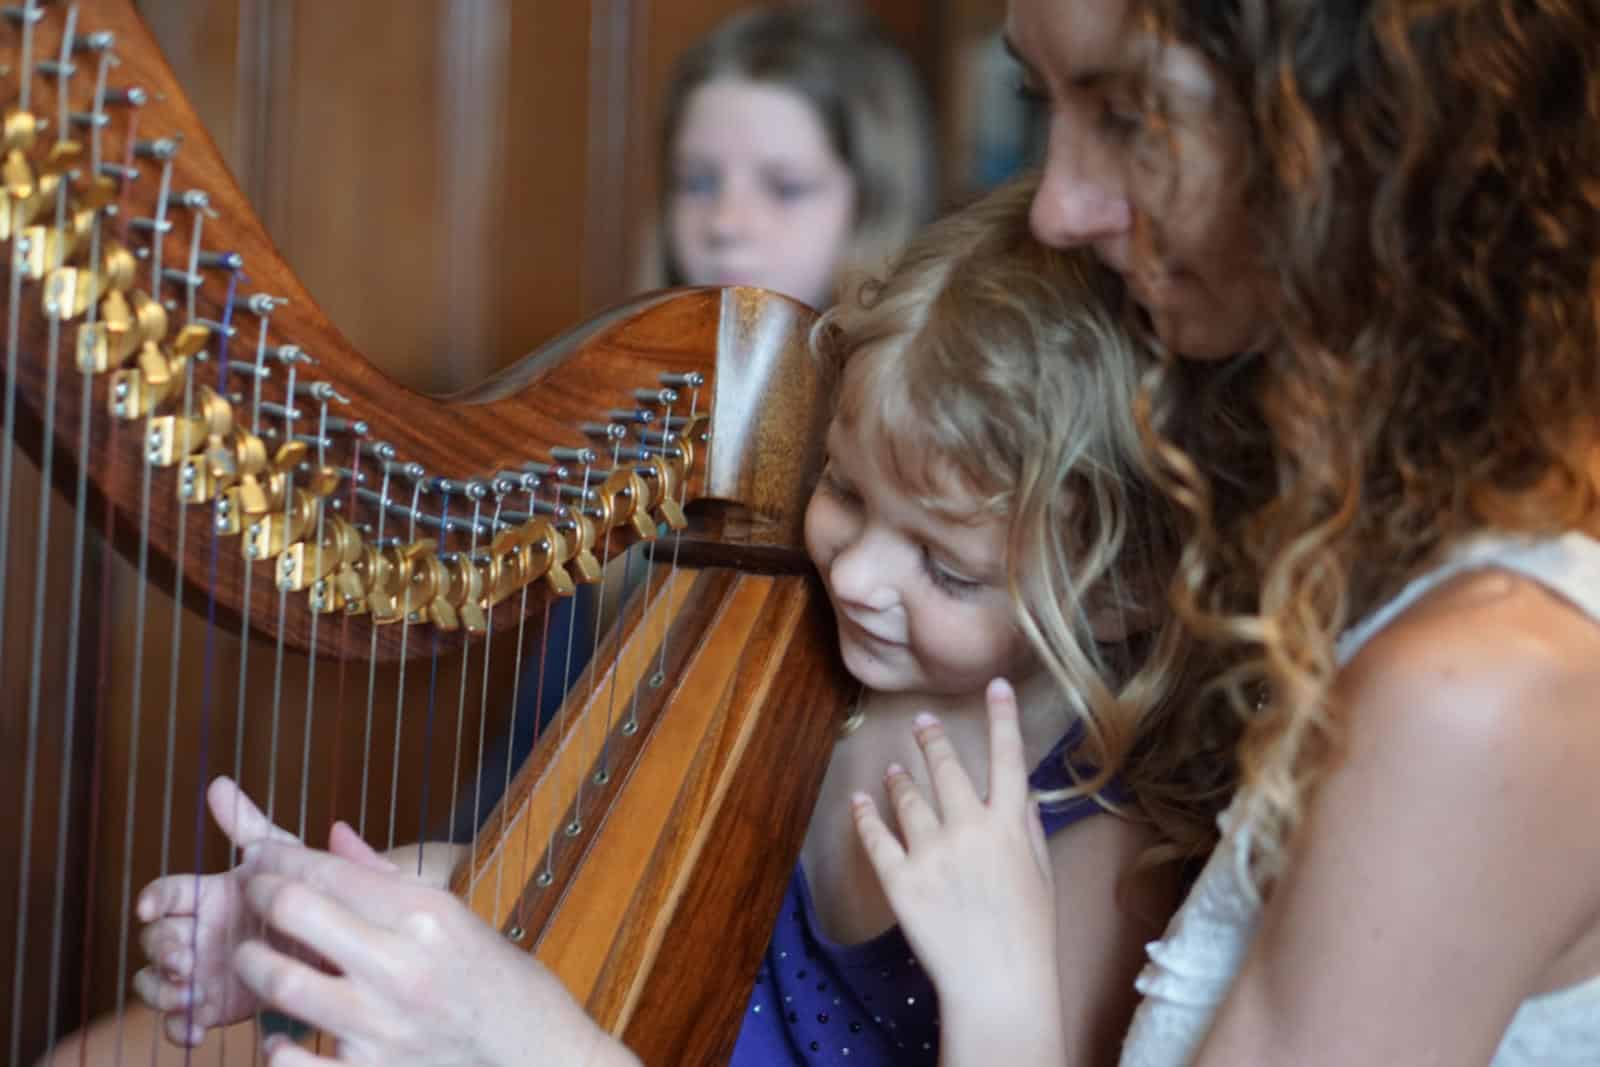 Harp Music is still possible while Worldschooling your children